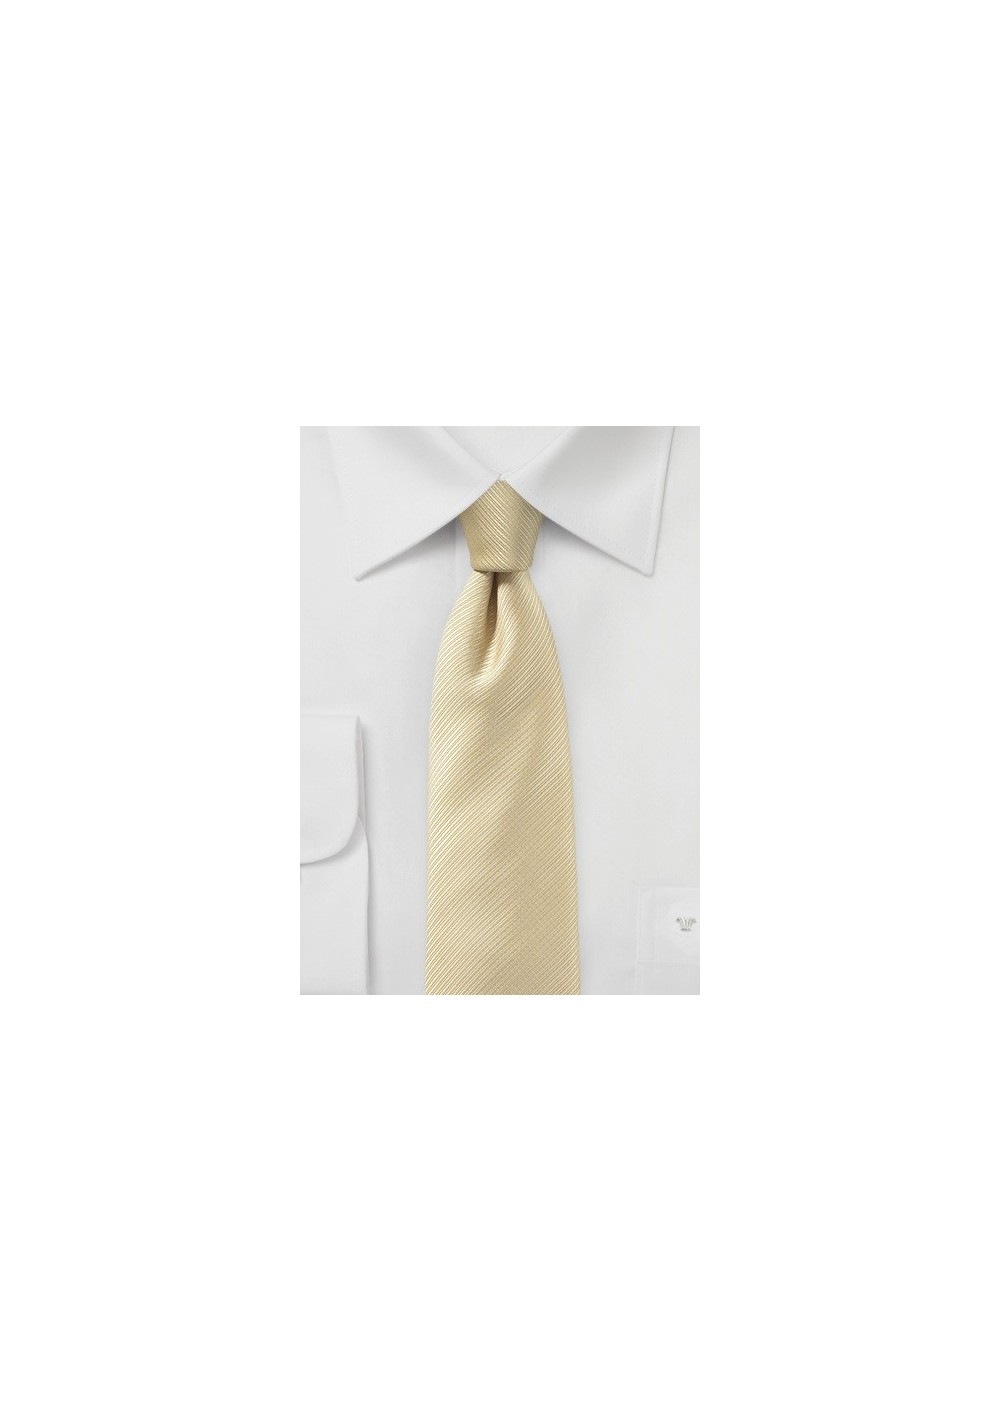 Ribbed Textured Skinny Tie in Cream